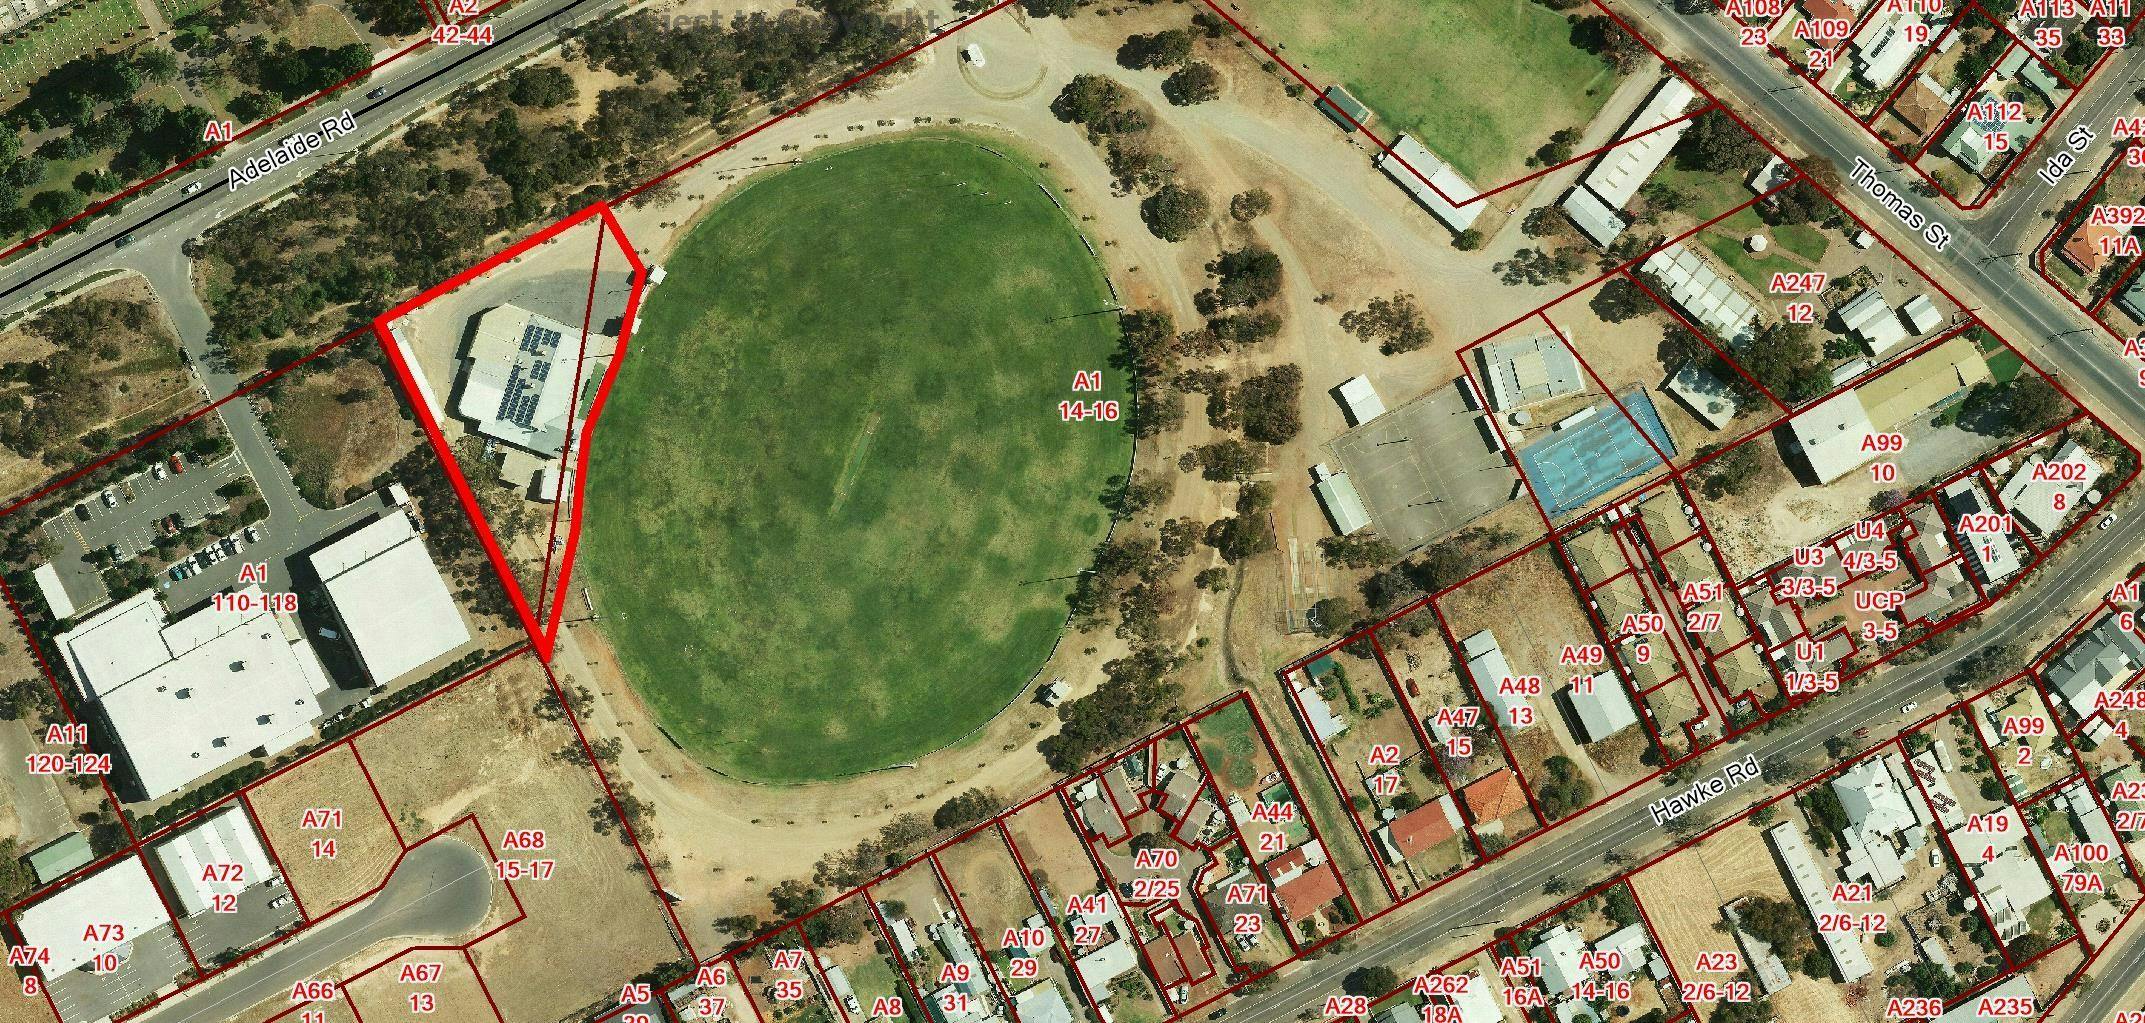 PC Imperial Football Club Proposed Lease Area Map image cropped